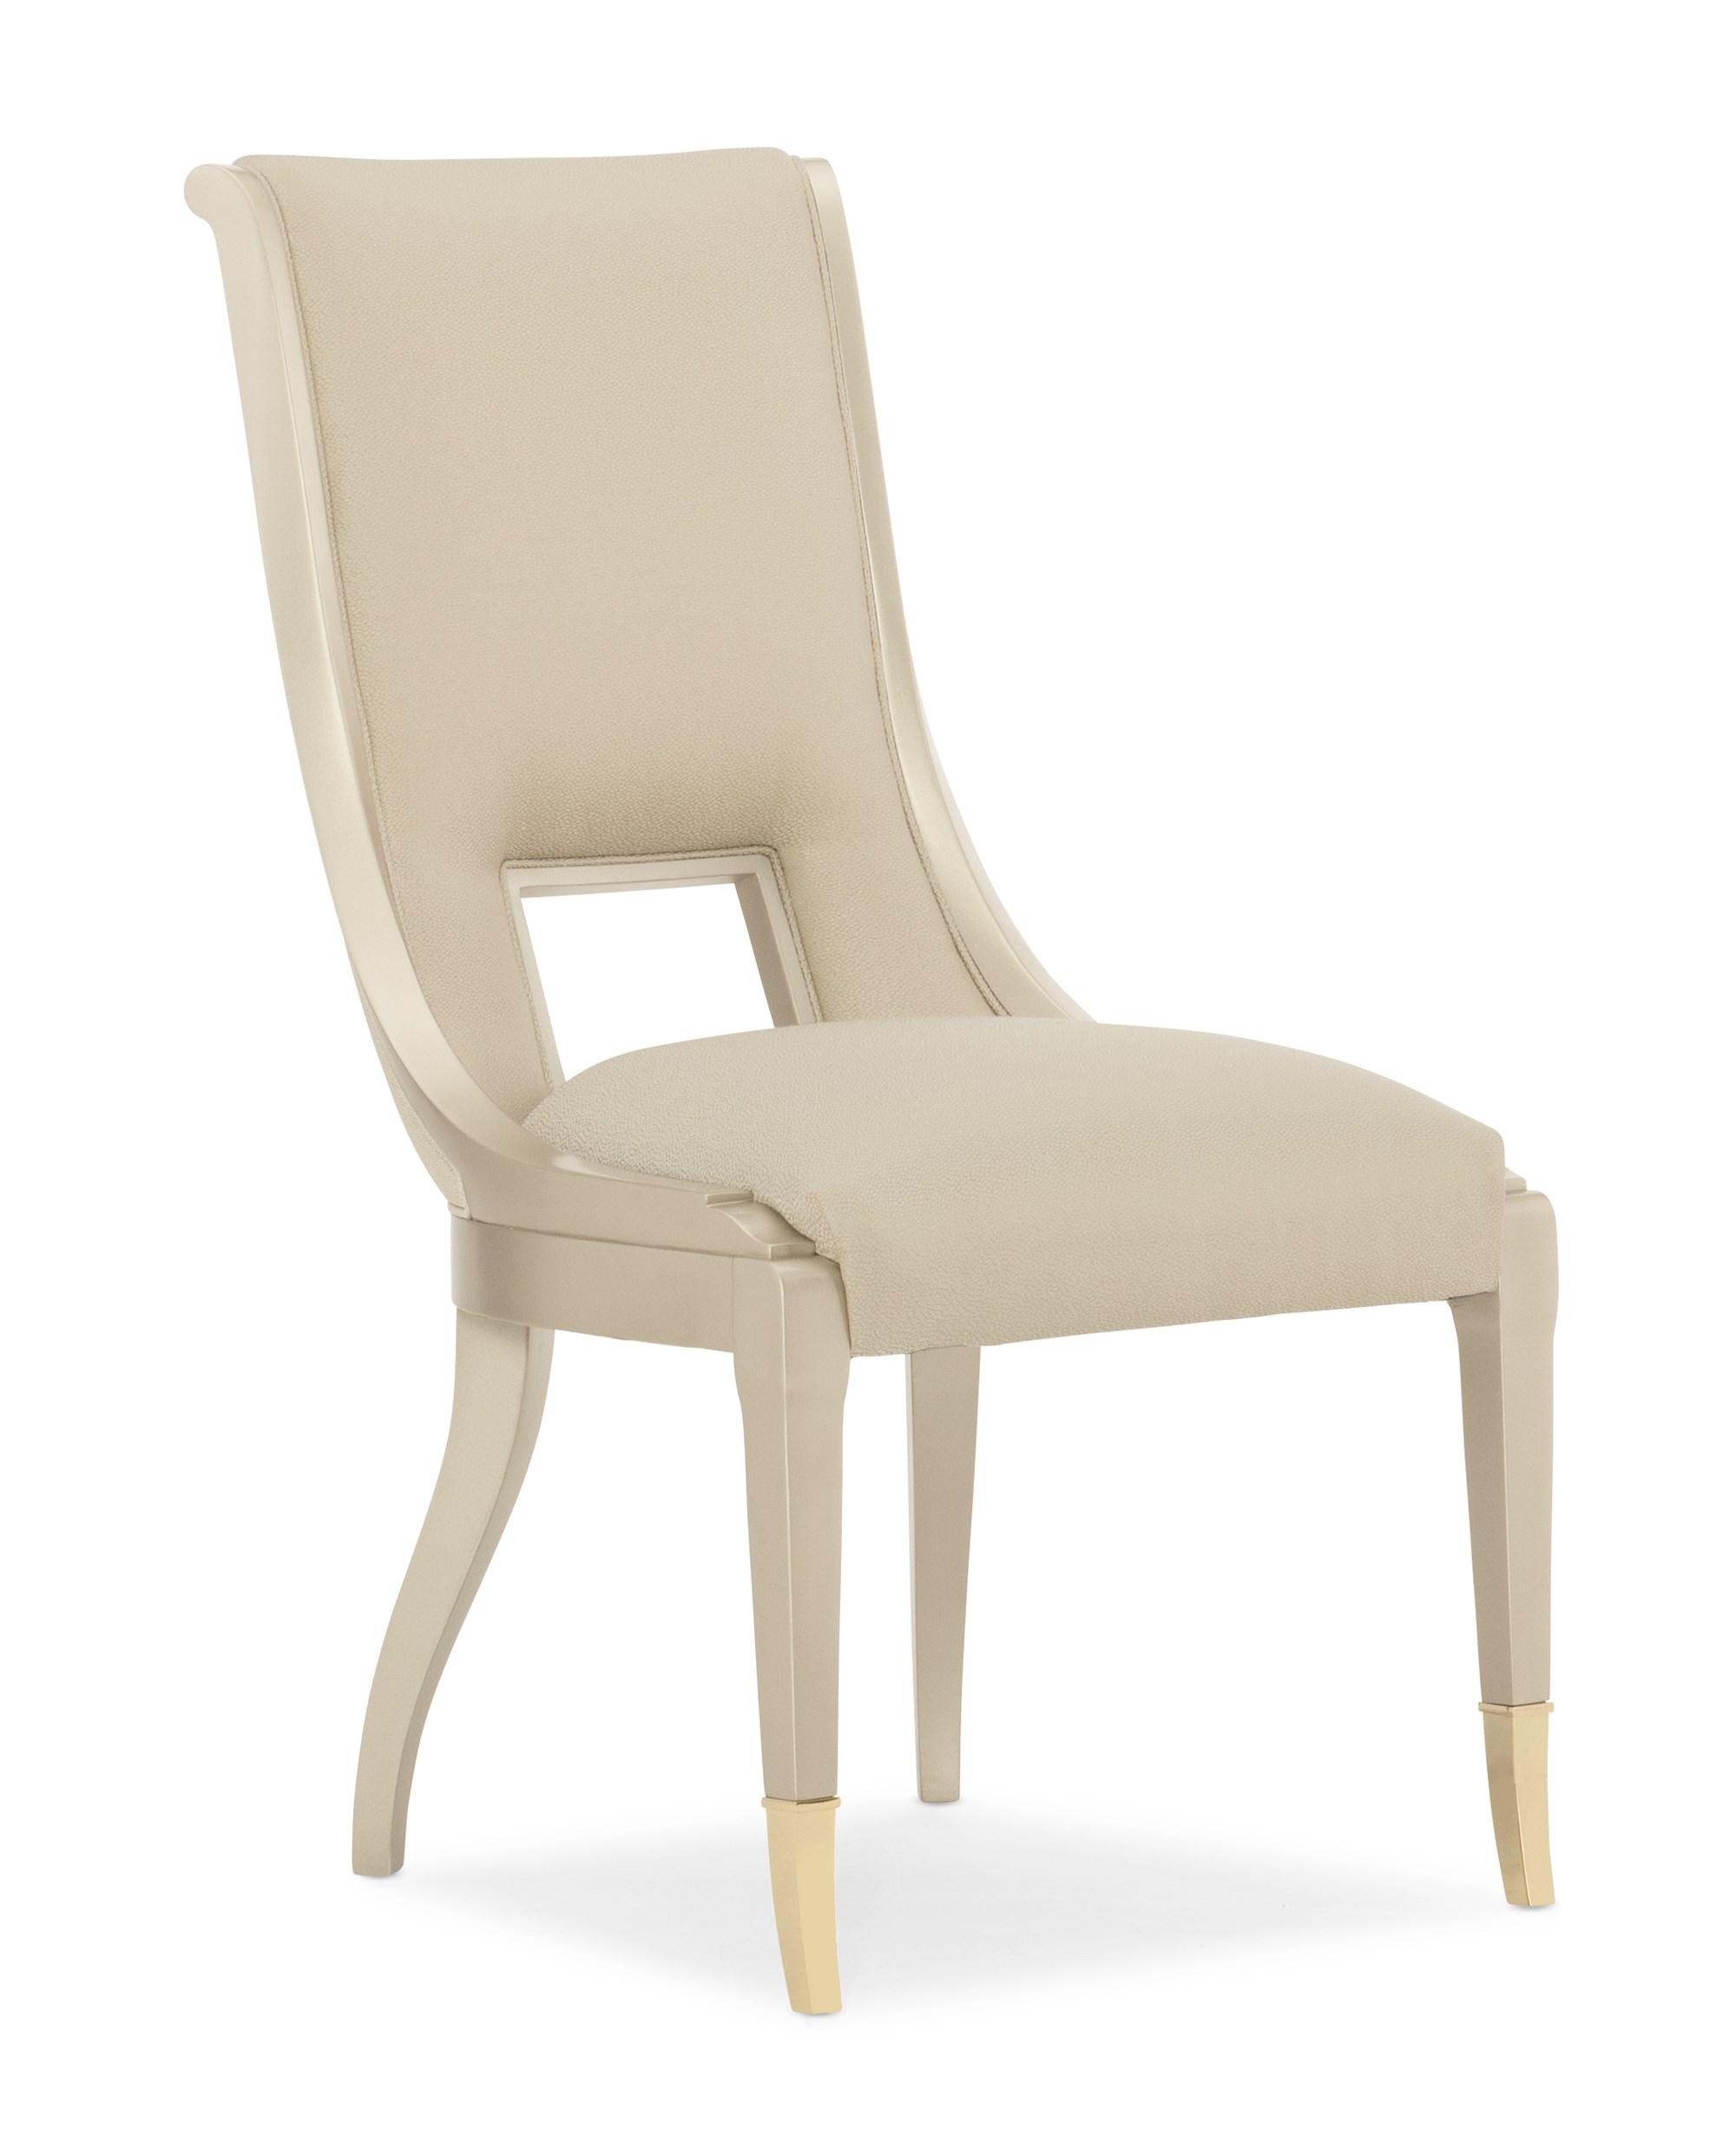 Contemporary Dining Chair Set IN GOOD TASTE DINING CHAIR CLA-019-284-Set-2 in Gold, Beige Fabric